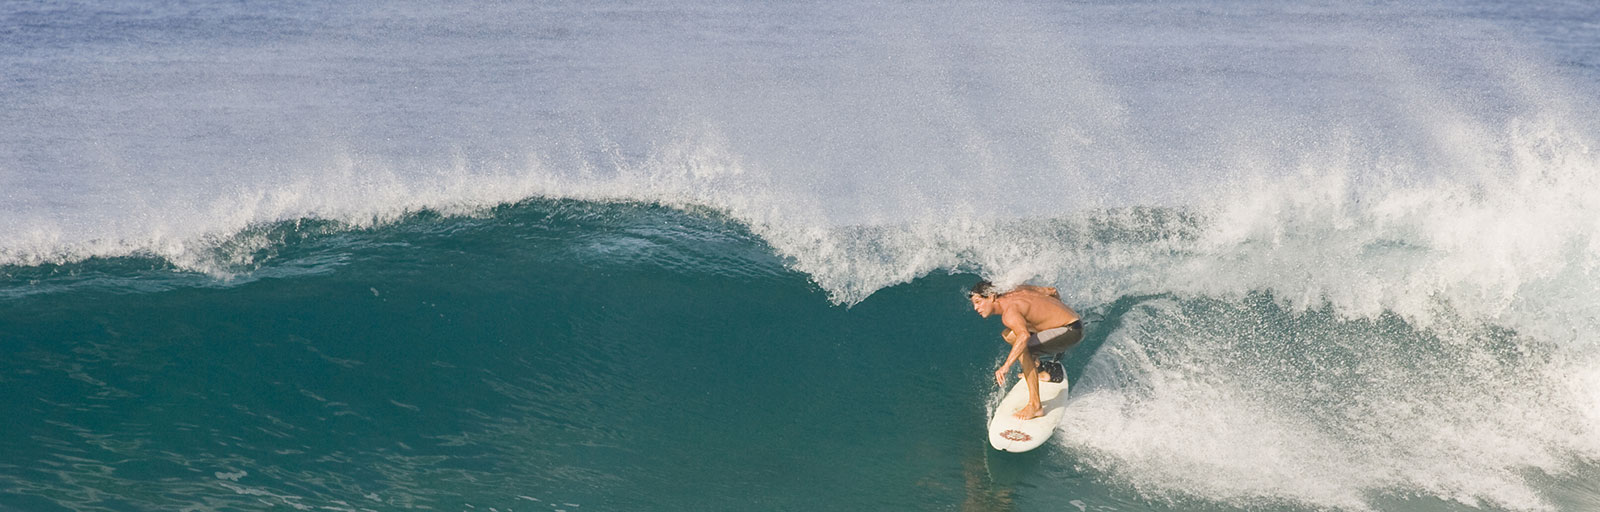 Surfing on a Yoga Retreat in Mexico: Ride a Wave